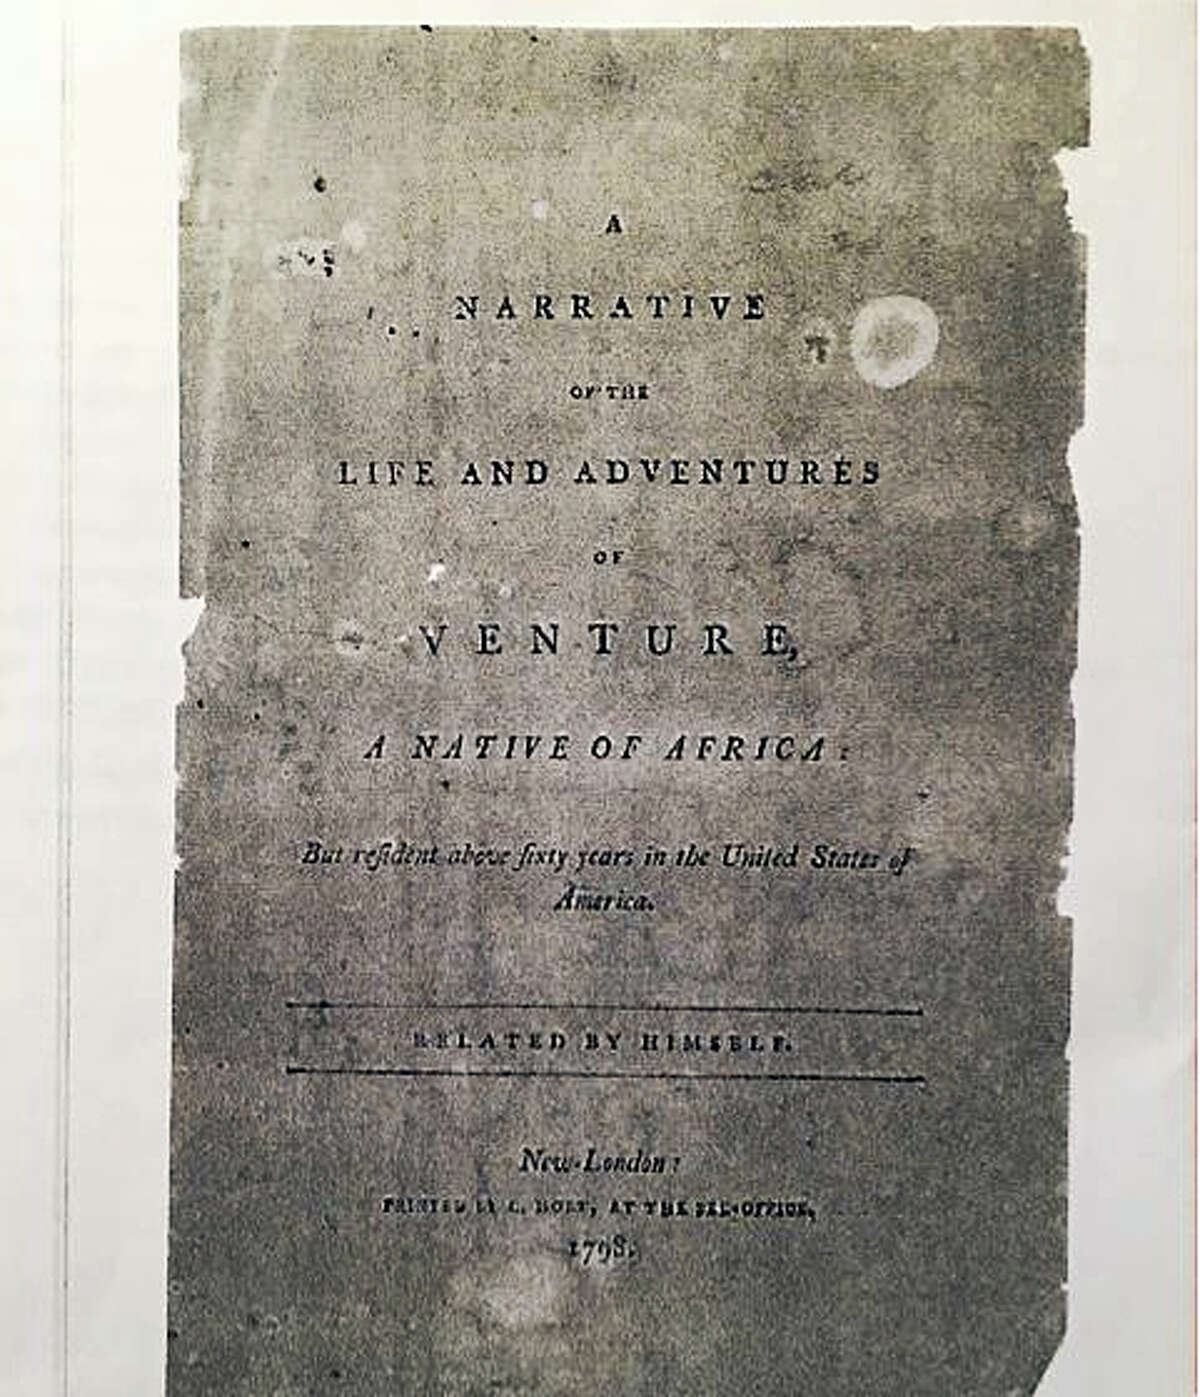 The cover of the 2017 reprinting of Venture Smith’s 1798 pamphlet